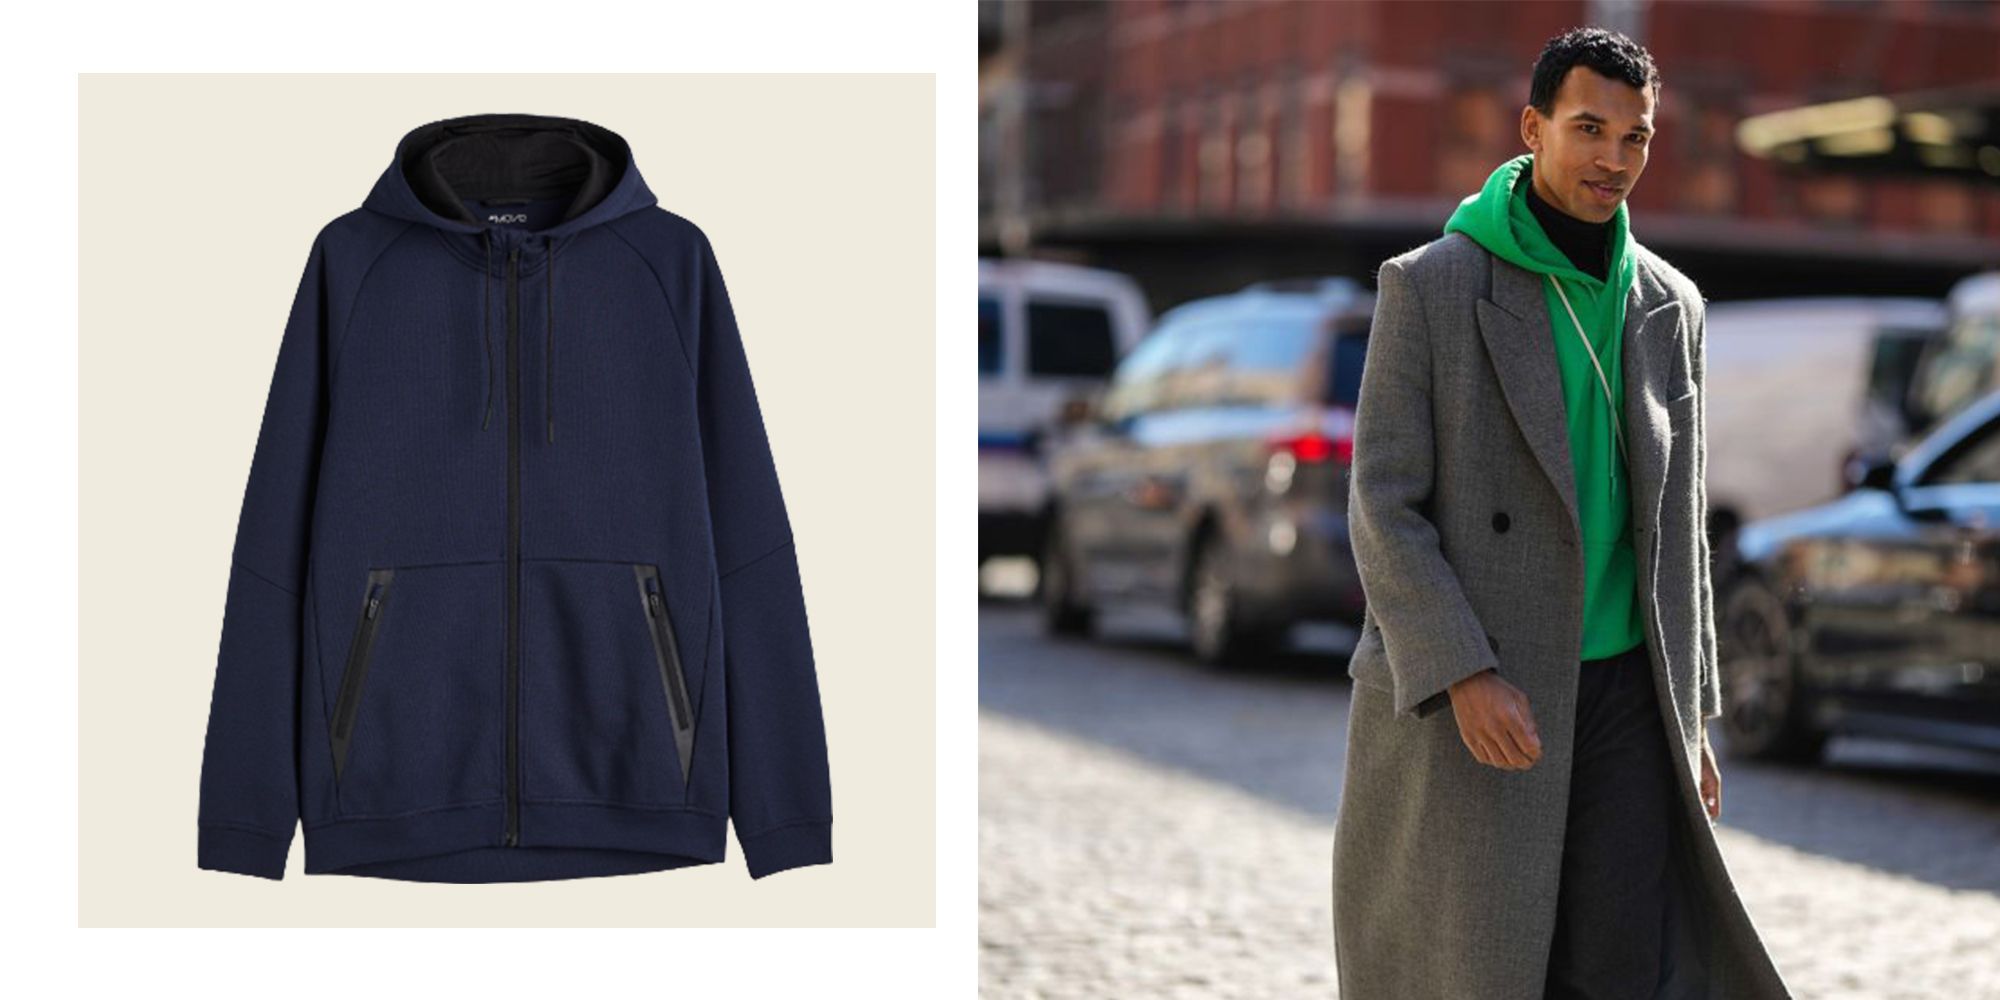 Best Hoodies For Men: Hoodies for and working in